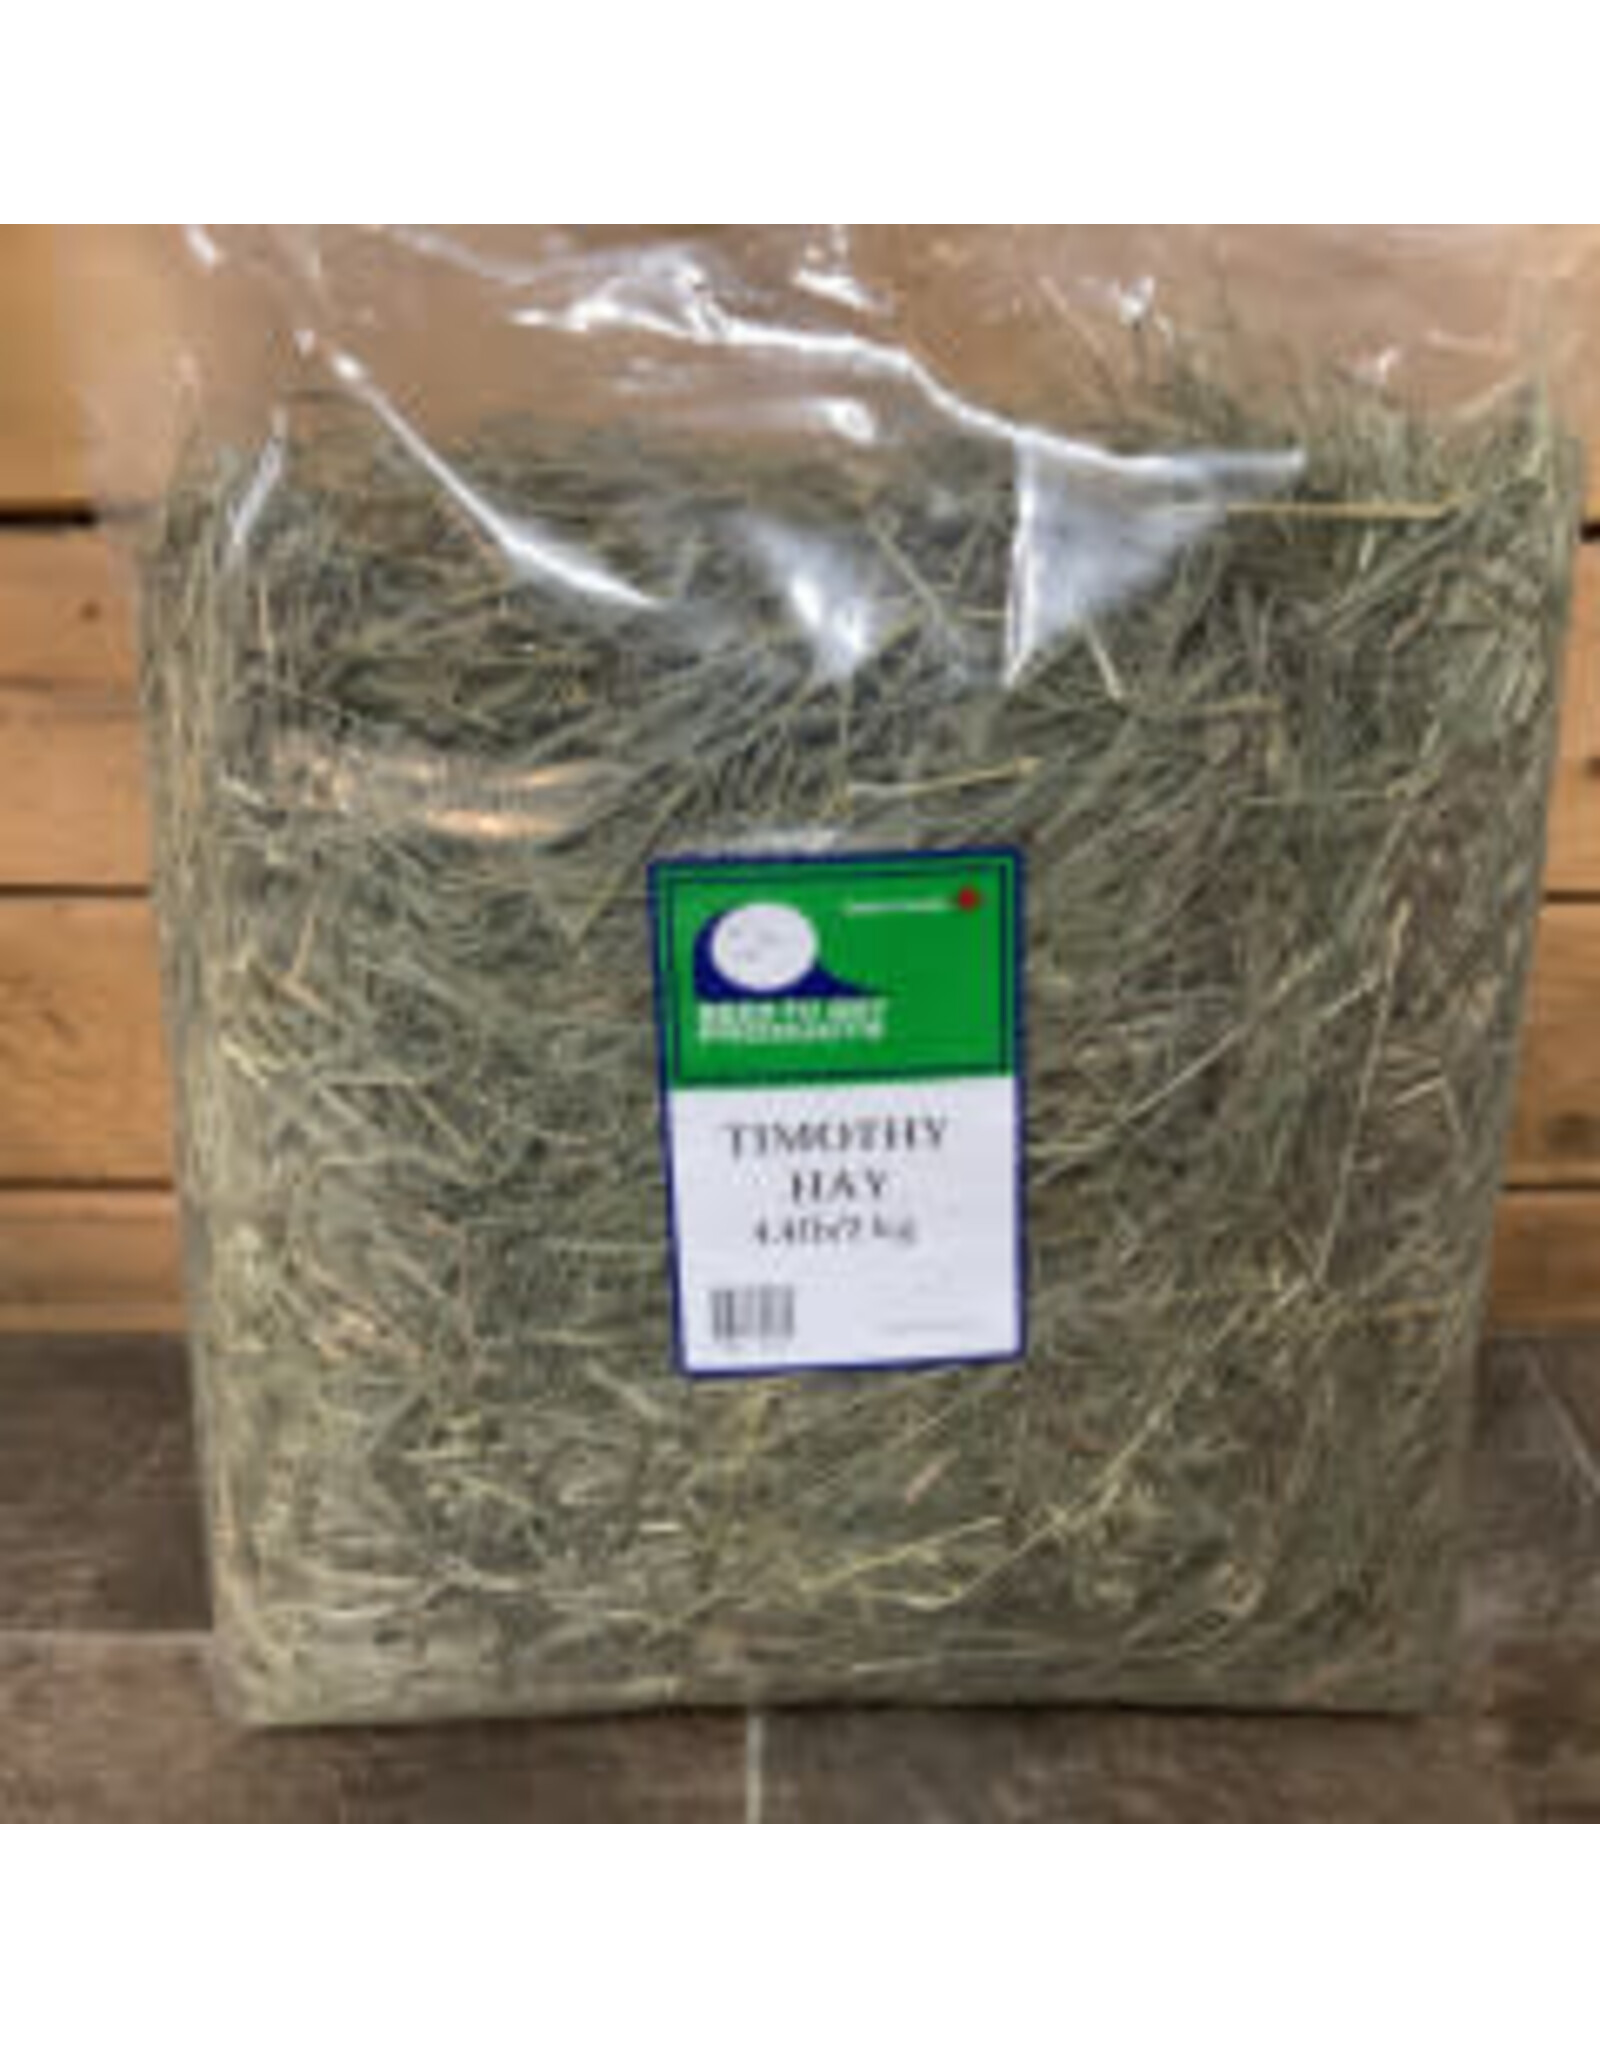 Seed to Sky STS Alberta Timothy Hay 1.1lb  - 34159 - Seed To Sky - Rabbit *Back Ordered Apr/24